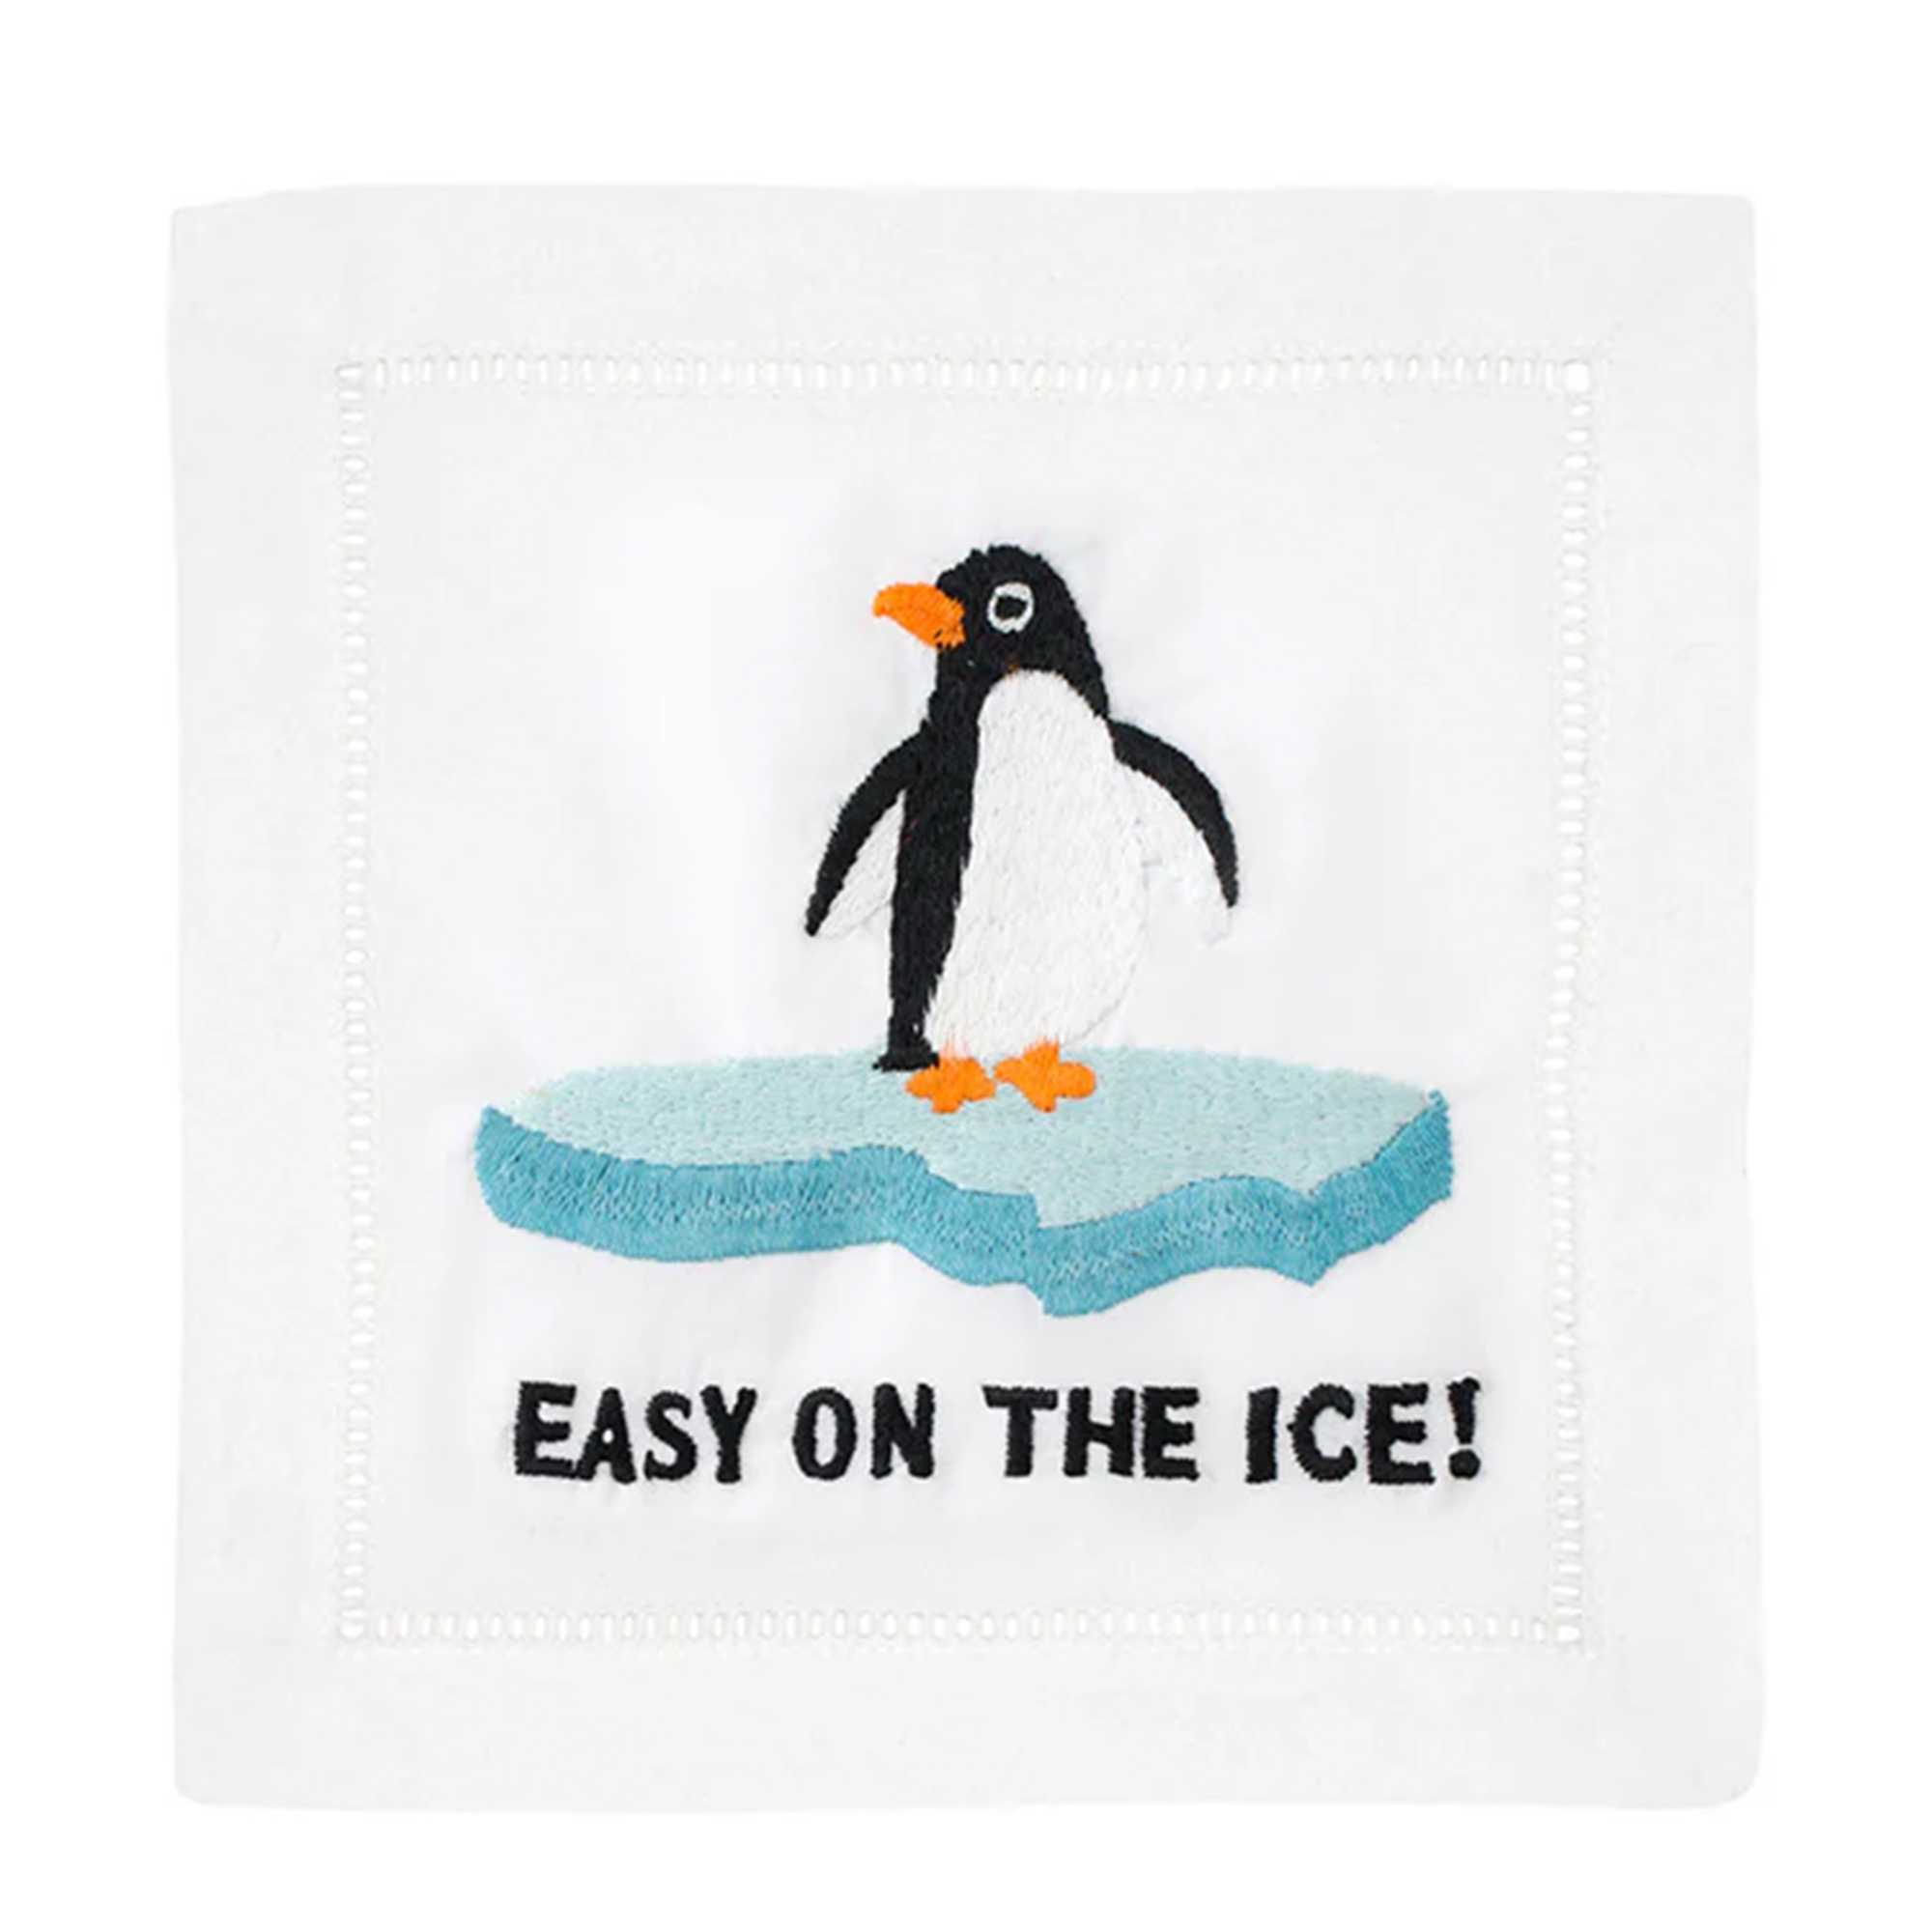 Set of four "Easy on the Ice" cocktail napkins in elegant linen with classic hemstitching, featuring whimsical designs including a penguin standing on ice.